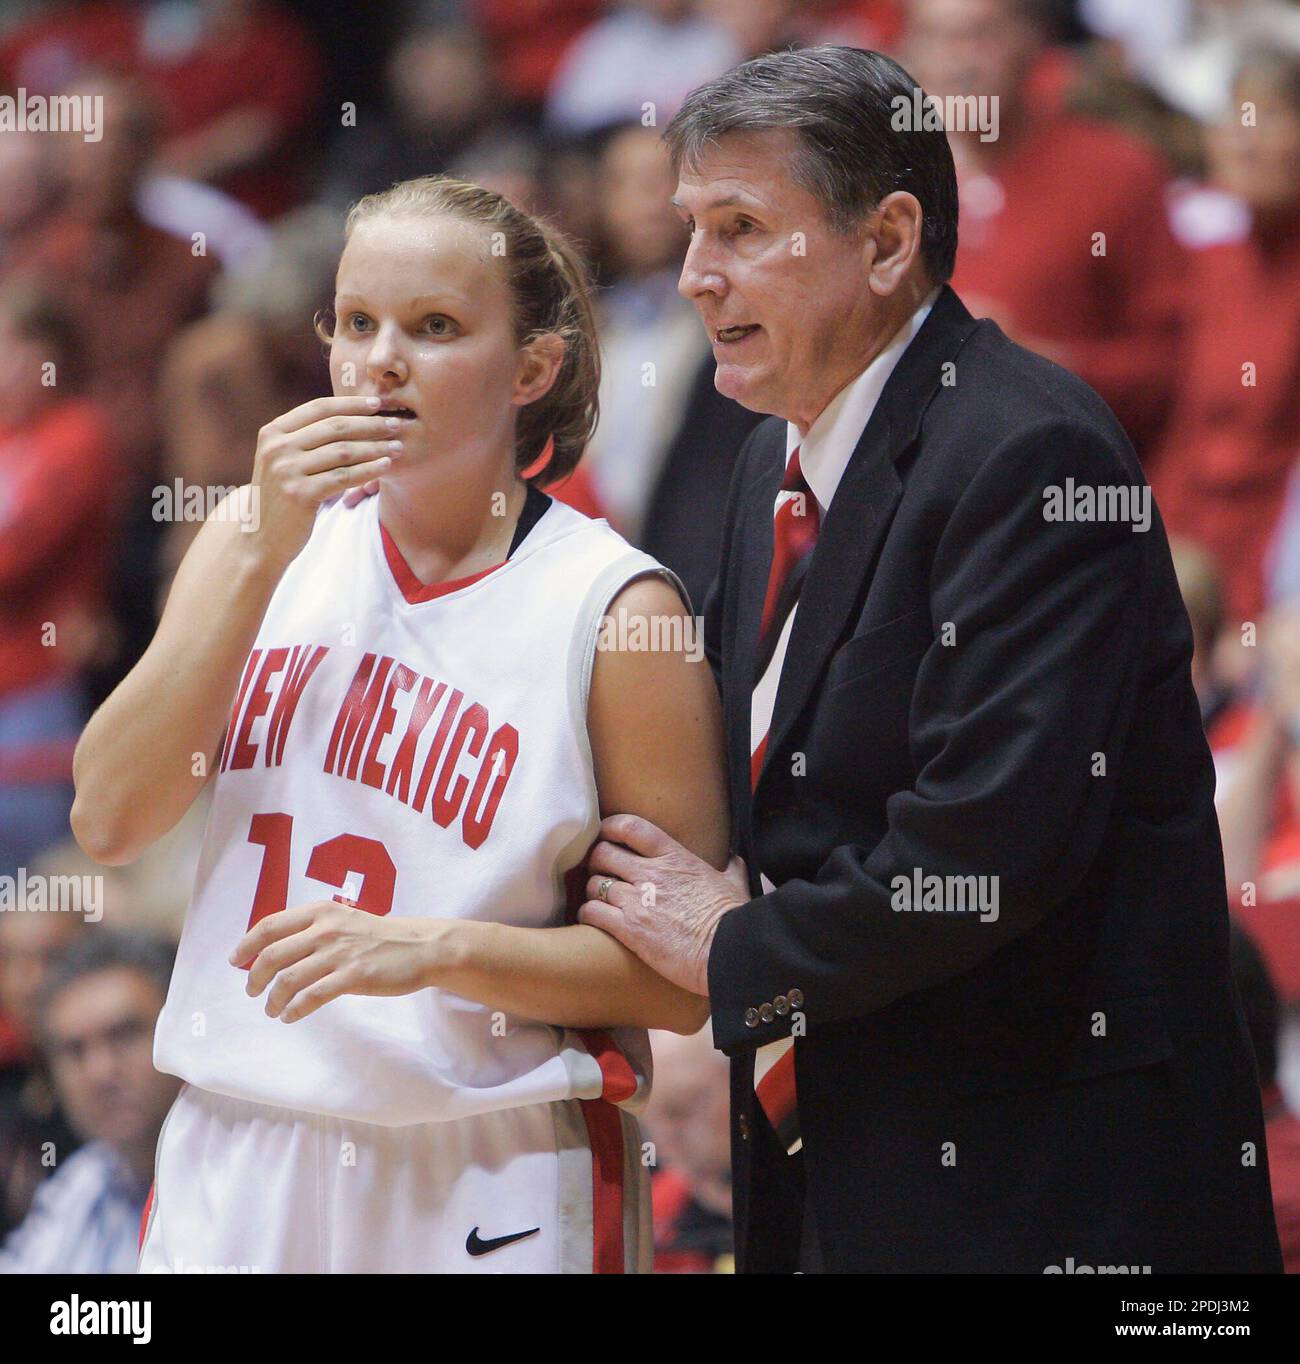 New Mexico coach Don Flanagan goes over some instructions with Katie Montgomery in the final seconds of the UNM Thanksgiving Tournament championship game at The Pit in Albuquerque, N.M., Saturday, Nov. 26, 2005. New Mexico defeated Oklahoma State 56-52. (AP Photo/Jake Schoellkopf) Stock Photo